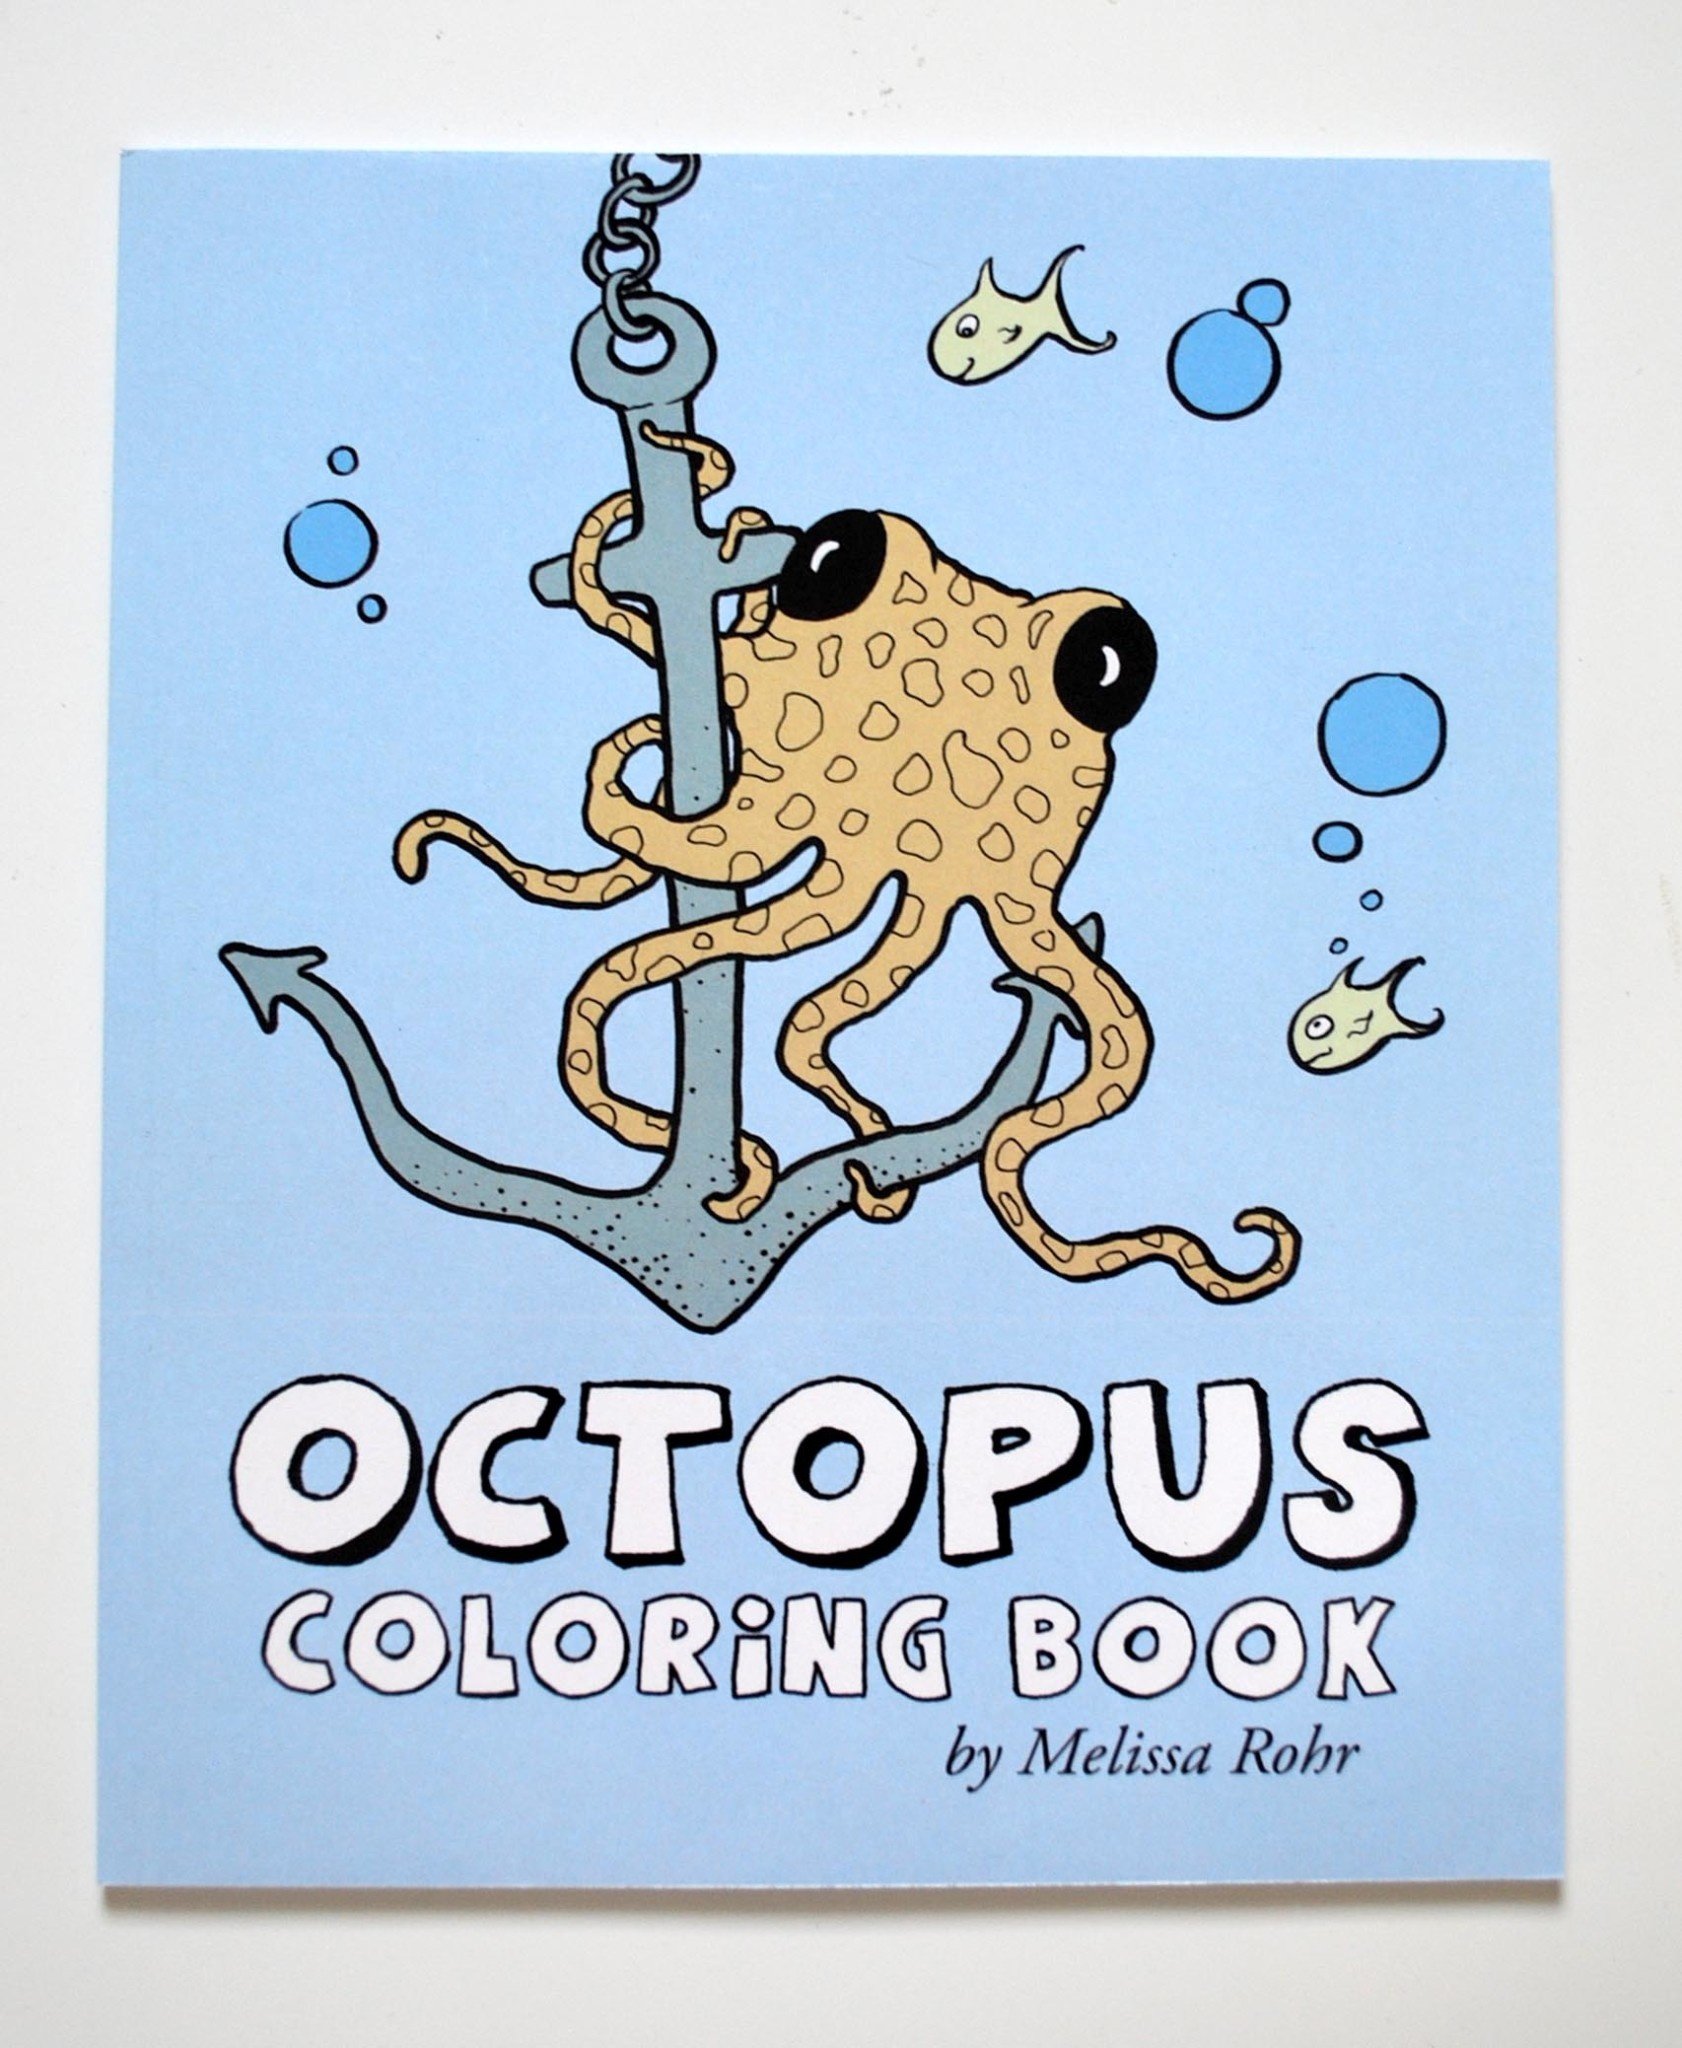 https://cdn.shoplightspeed.com/shops/636205/files/22616338/the-island-octopus-octopus-coloring-book-by-the-is.jpg